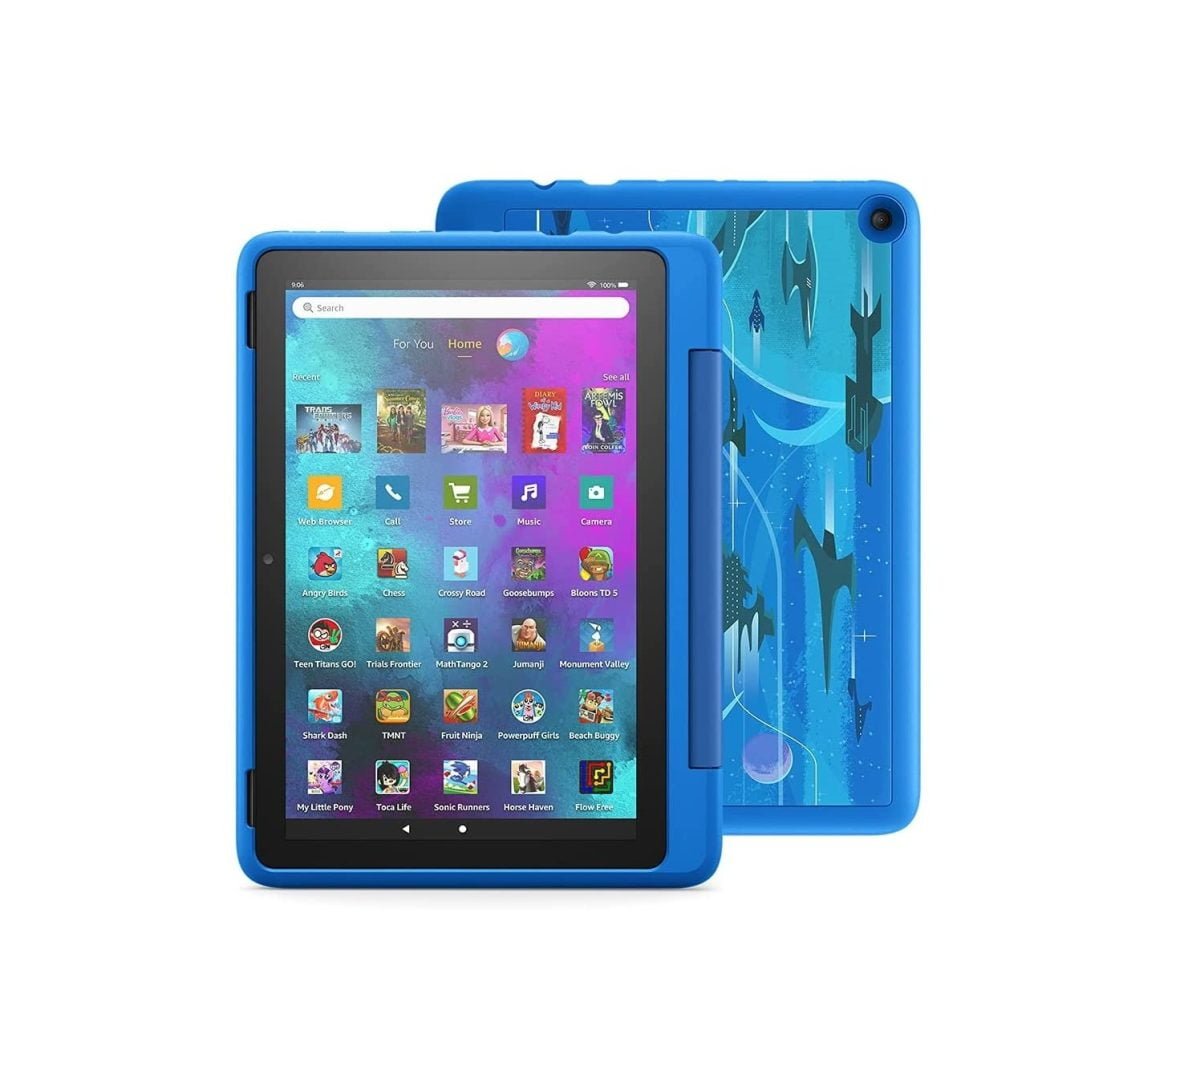 7169Uliw15S. Ac Sl1000 Amazon &Amp;Lt;H1&Amp;Gt;Fire Hd 10 Kids Pro Tablet, 10.1&Amp;Quot;, 1080P Full Hd, Ages 6–12, 32 Gb, &Amp;Lt;Span Id=&Amp;Quot;Producttitle&Amp;Quot; Class=&Amp;Quot;A-Size-Large Product-Title-Word-Break&Amp;Quot;&Amp;Gt;Intergalactic&Amp;Lt;/Span&Amp;Gt;&Amp;Lt;/H1&Amp;Gt; &Amp;Lt;Ul Class=&Amp;Quot;A-Unordered-List A-Vertical A-Spacing-Mini&Amp;Quot;&Amp;Gt; &Amp;Lt;Li&Amp;Gt;&Amp;Lt;Span Class=&Amp;Quot;A-List-Item&Amp;Quot;&Amp;Gt;Features An Octa-Core Processor, 3 Gb Ram, 10.1&Amp;Quot; Full Hd Display, Dual Cameras, Usb-C (2.0) Port, And Up To 1 Tb Of Expandable Storage. Screen Made With Strengthened Aluminosilicate Glass.&Amp;Lt;/Span&Amp;Gt;&Amp;Lt;/Li&Amp;Gt; &Amp;Lt;Li&Amp;Gt;&Amp;Lt;Span Class=&Amp;Quot;A-List-Item&Amp;Quot;&Amp;Gt;In Addition To Kids+ Content, Kids Pro Tablets Include Access To A Digital Store. Kids Can Request Apps, While Parents Approve Purchases And Downloads. Plus, Parents Can Add Access To More Apps Like Minecraft And Zoom.&Amp;Lt;/Span&Amp;Gt;&Amp;Lt;/Li&Amp;Gt; &Amp;Lt;Li&Amp;Gt;&Amp;Lt;Span Class=&Amp;Quot;A-List-Item&Amp;Quot;&Amp;Gt;The Web Browser Comes With Built-In Controls Designed To Help Filter Out Inappropriate Sites And Let Parents Add Or Block Specific Websites At Any Time.&Amp;Lt;/Span&Amp;Gt;&Amp;Lt;/Li&Amp;Gt; &Amp;Lt;Li&Amp;Gt;&Amp;Lt;Span Class=&Amp;Quot;A-List-Item&Amp;Quot;&Amp;Gt;Stay In Touch – Kids Can Send Announcements And Make Voice And Video Calls Over Wifi To Approved Contacts With An Alexa-Enabled Device Or The Alexa App.&Amp;Lt;/Span&Amp;Gt;&Amp;Lt;/Li&Amp;Gt; &Amp;Lt;/Ul&Amp;Gt; Fire Hd 10 Fire Hd 10 Kids Pro Tablet, 10.1&Amp;Quot;, 1080P Full Hd 11Th Generation, Ages 6–12, 32 Gb, Intergalactic